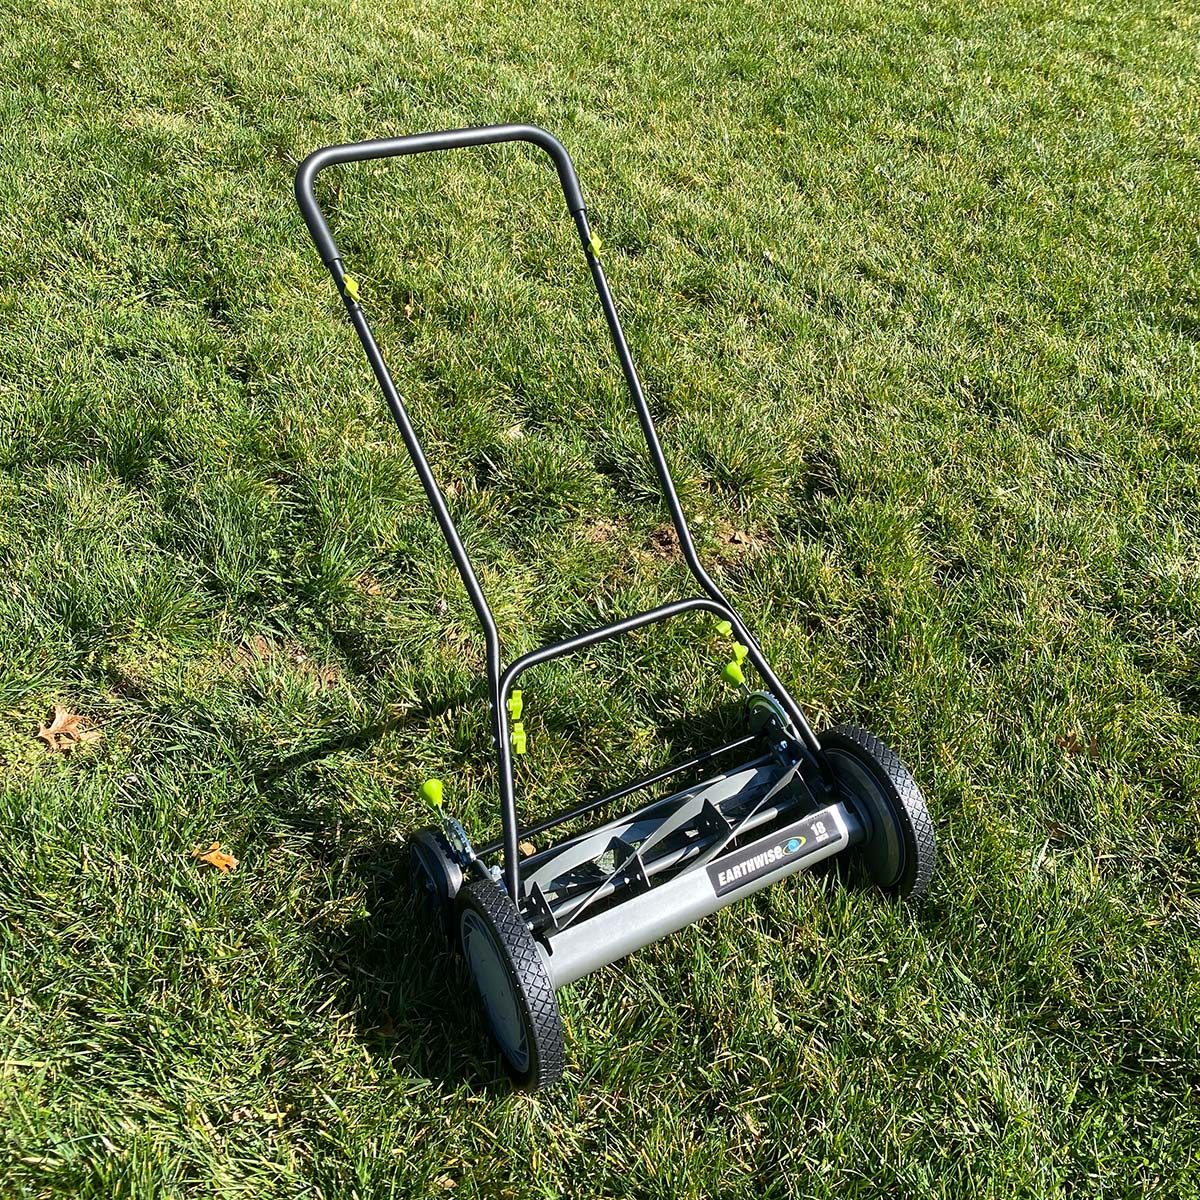 Basics 18-Inch 5-Blade Push Reel Lawn Mower with Grass Catcher, Blue